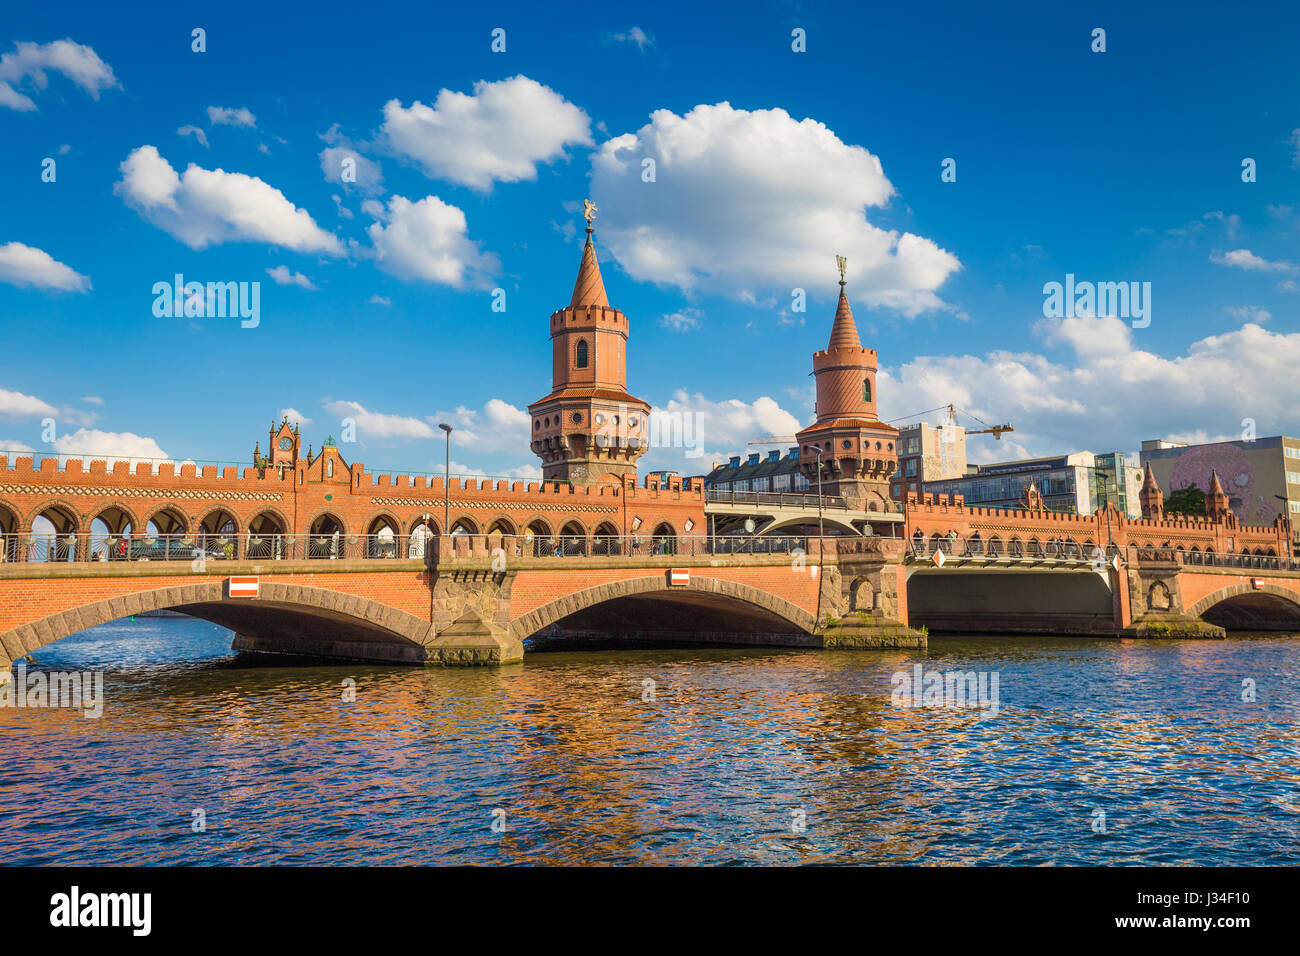 Beautiful view of famous Oberbaum Bridge crossing the Spree river on a sunny day with blue sky and clouds in summer, Berlin, Germany Stock Photo